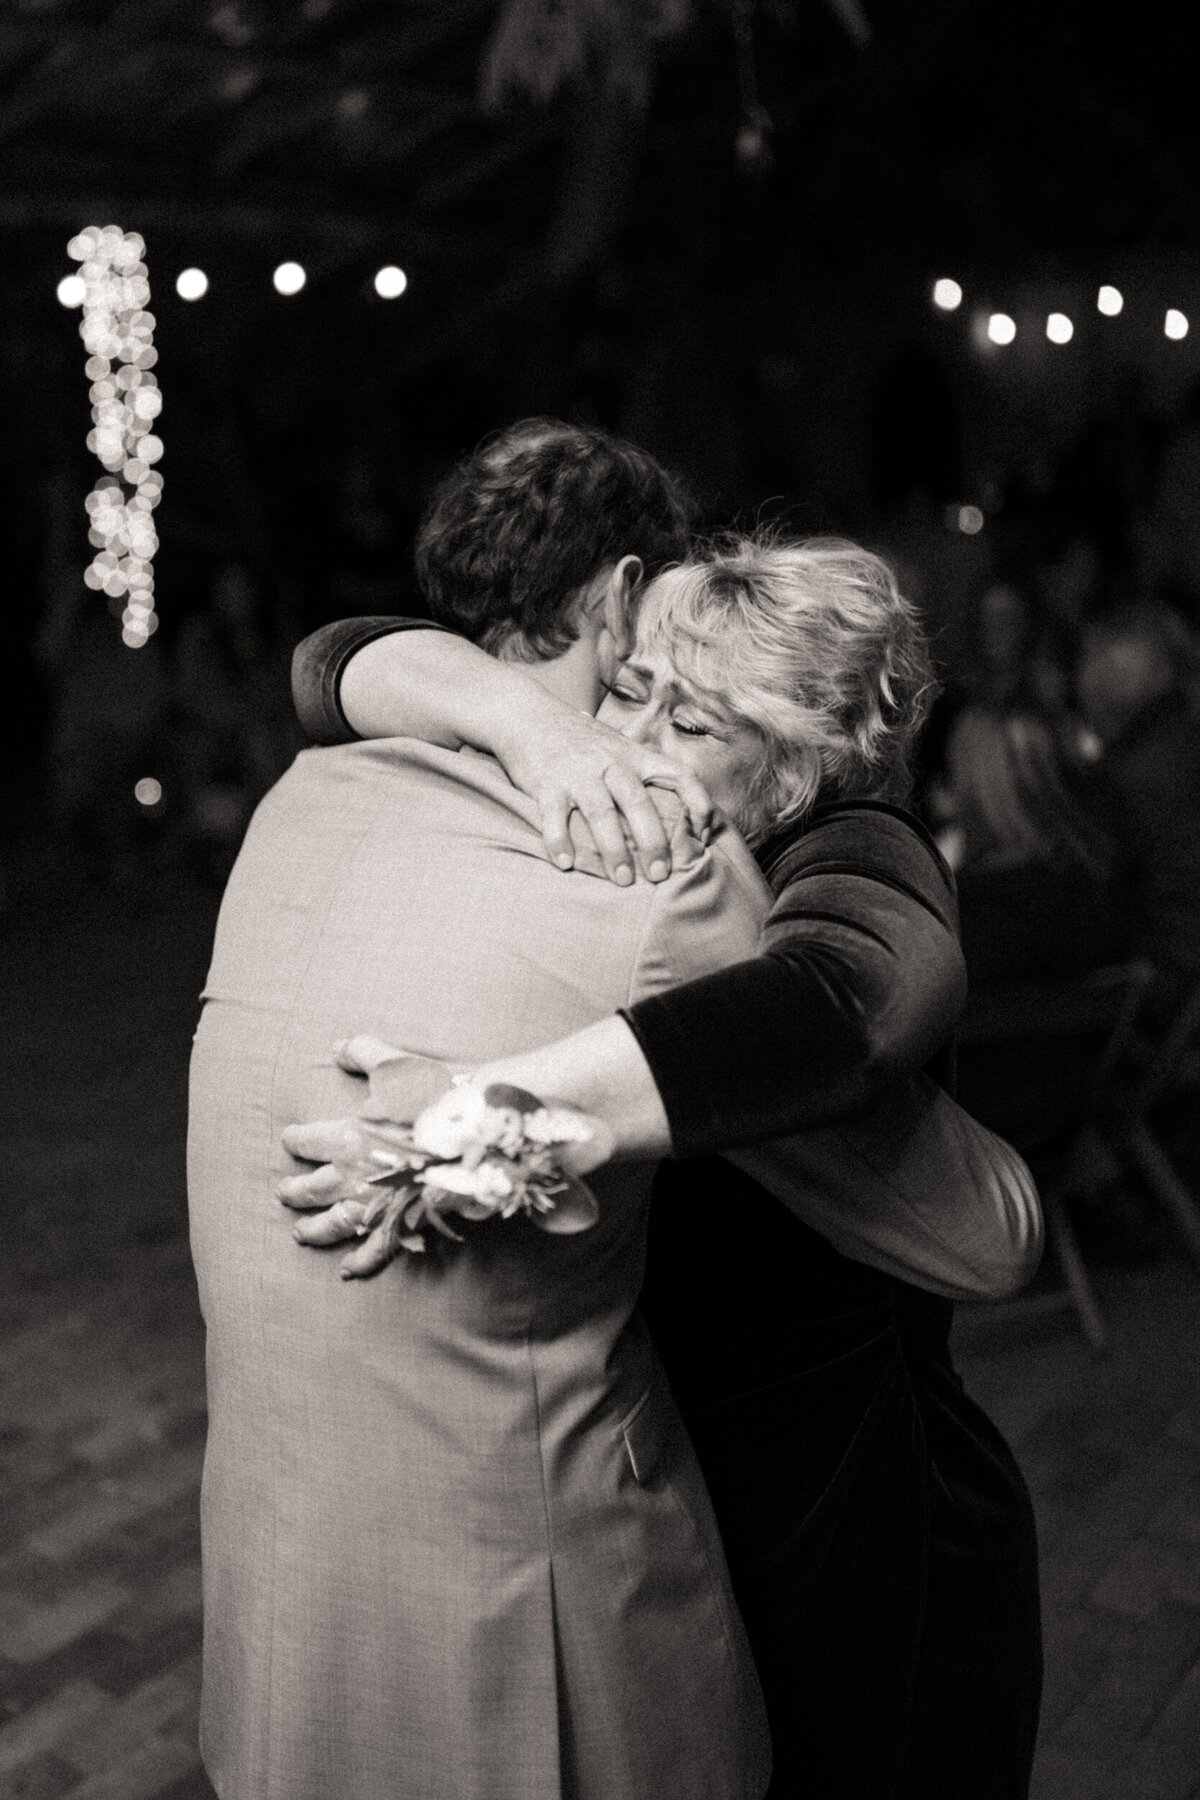 Mother of the groom tightly hugging the groom while crying and getting emotional during the mother son dance at a wedding reception